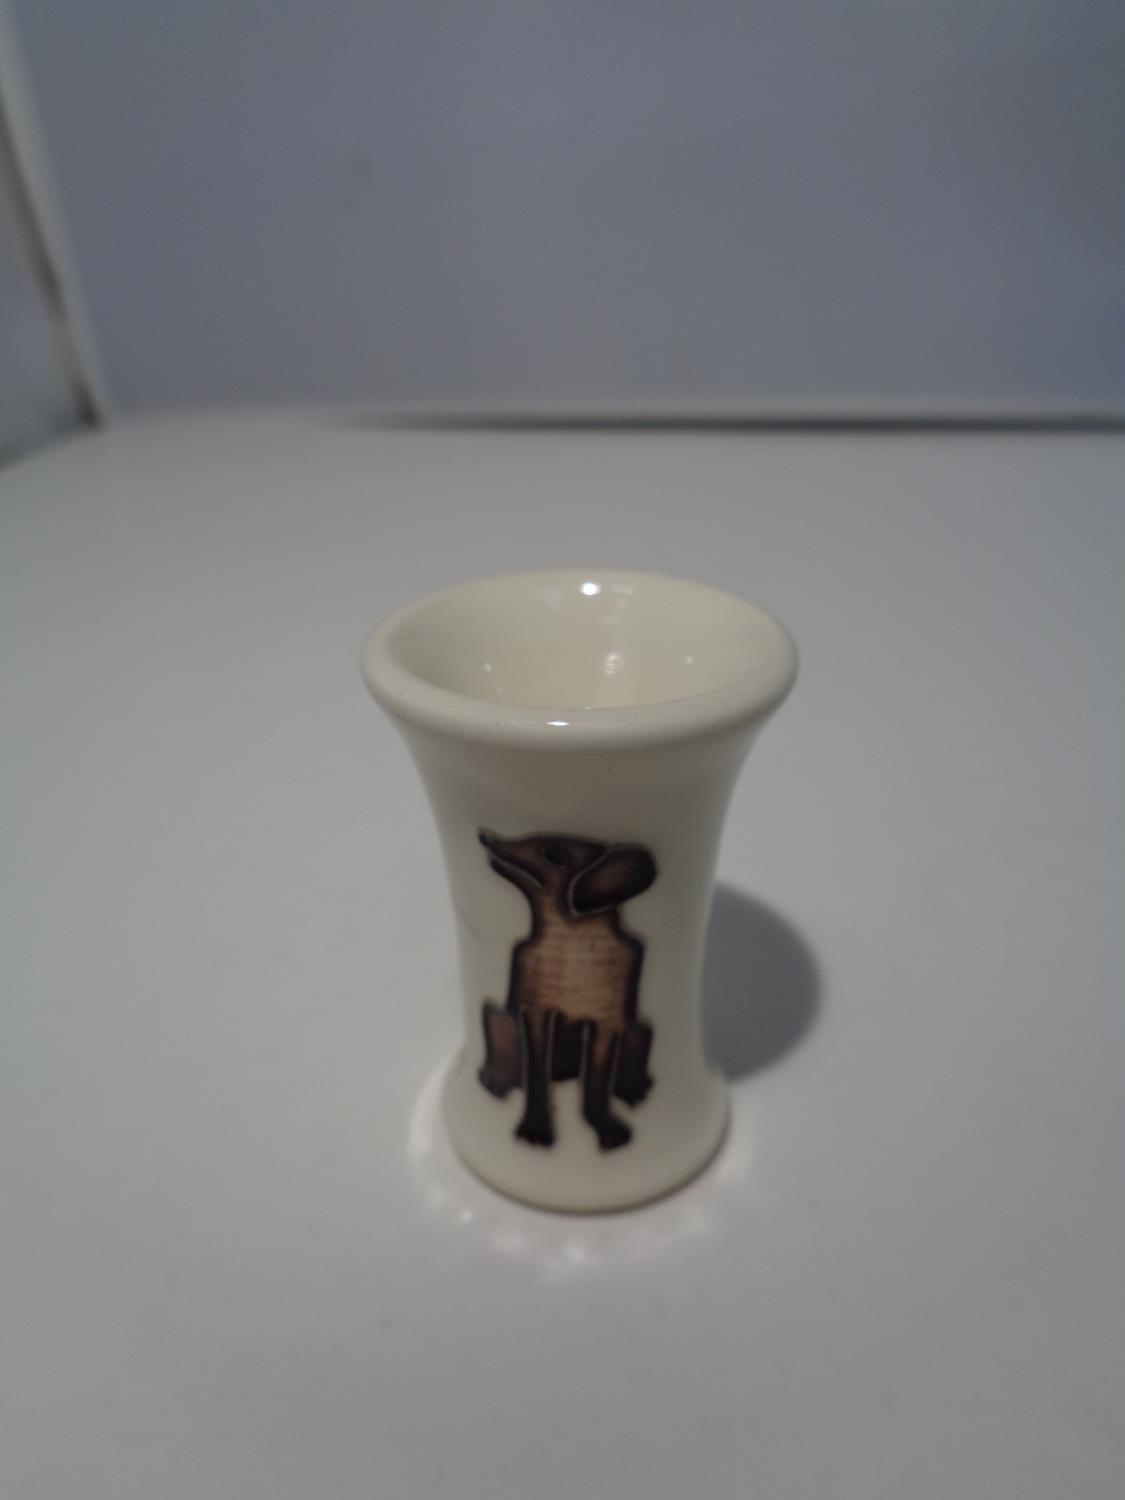 A MOORCROFT CHOCOLATE LABRADOR VASE 2 INCHES TALL - Image 7 of 8